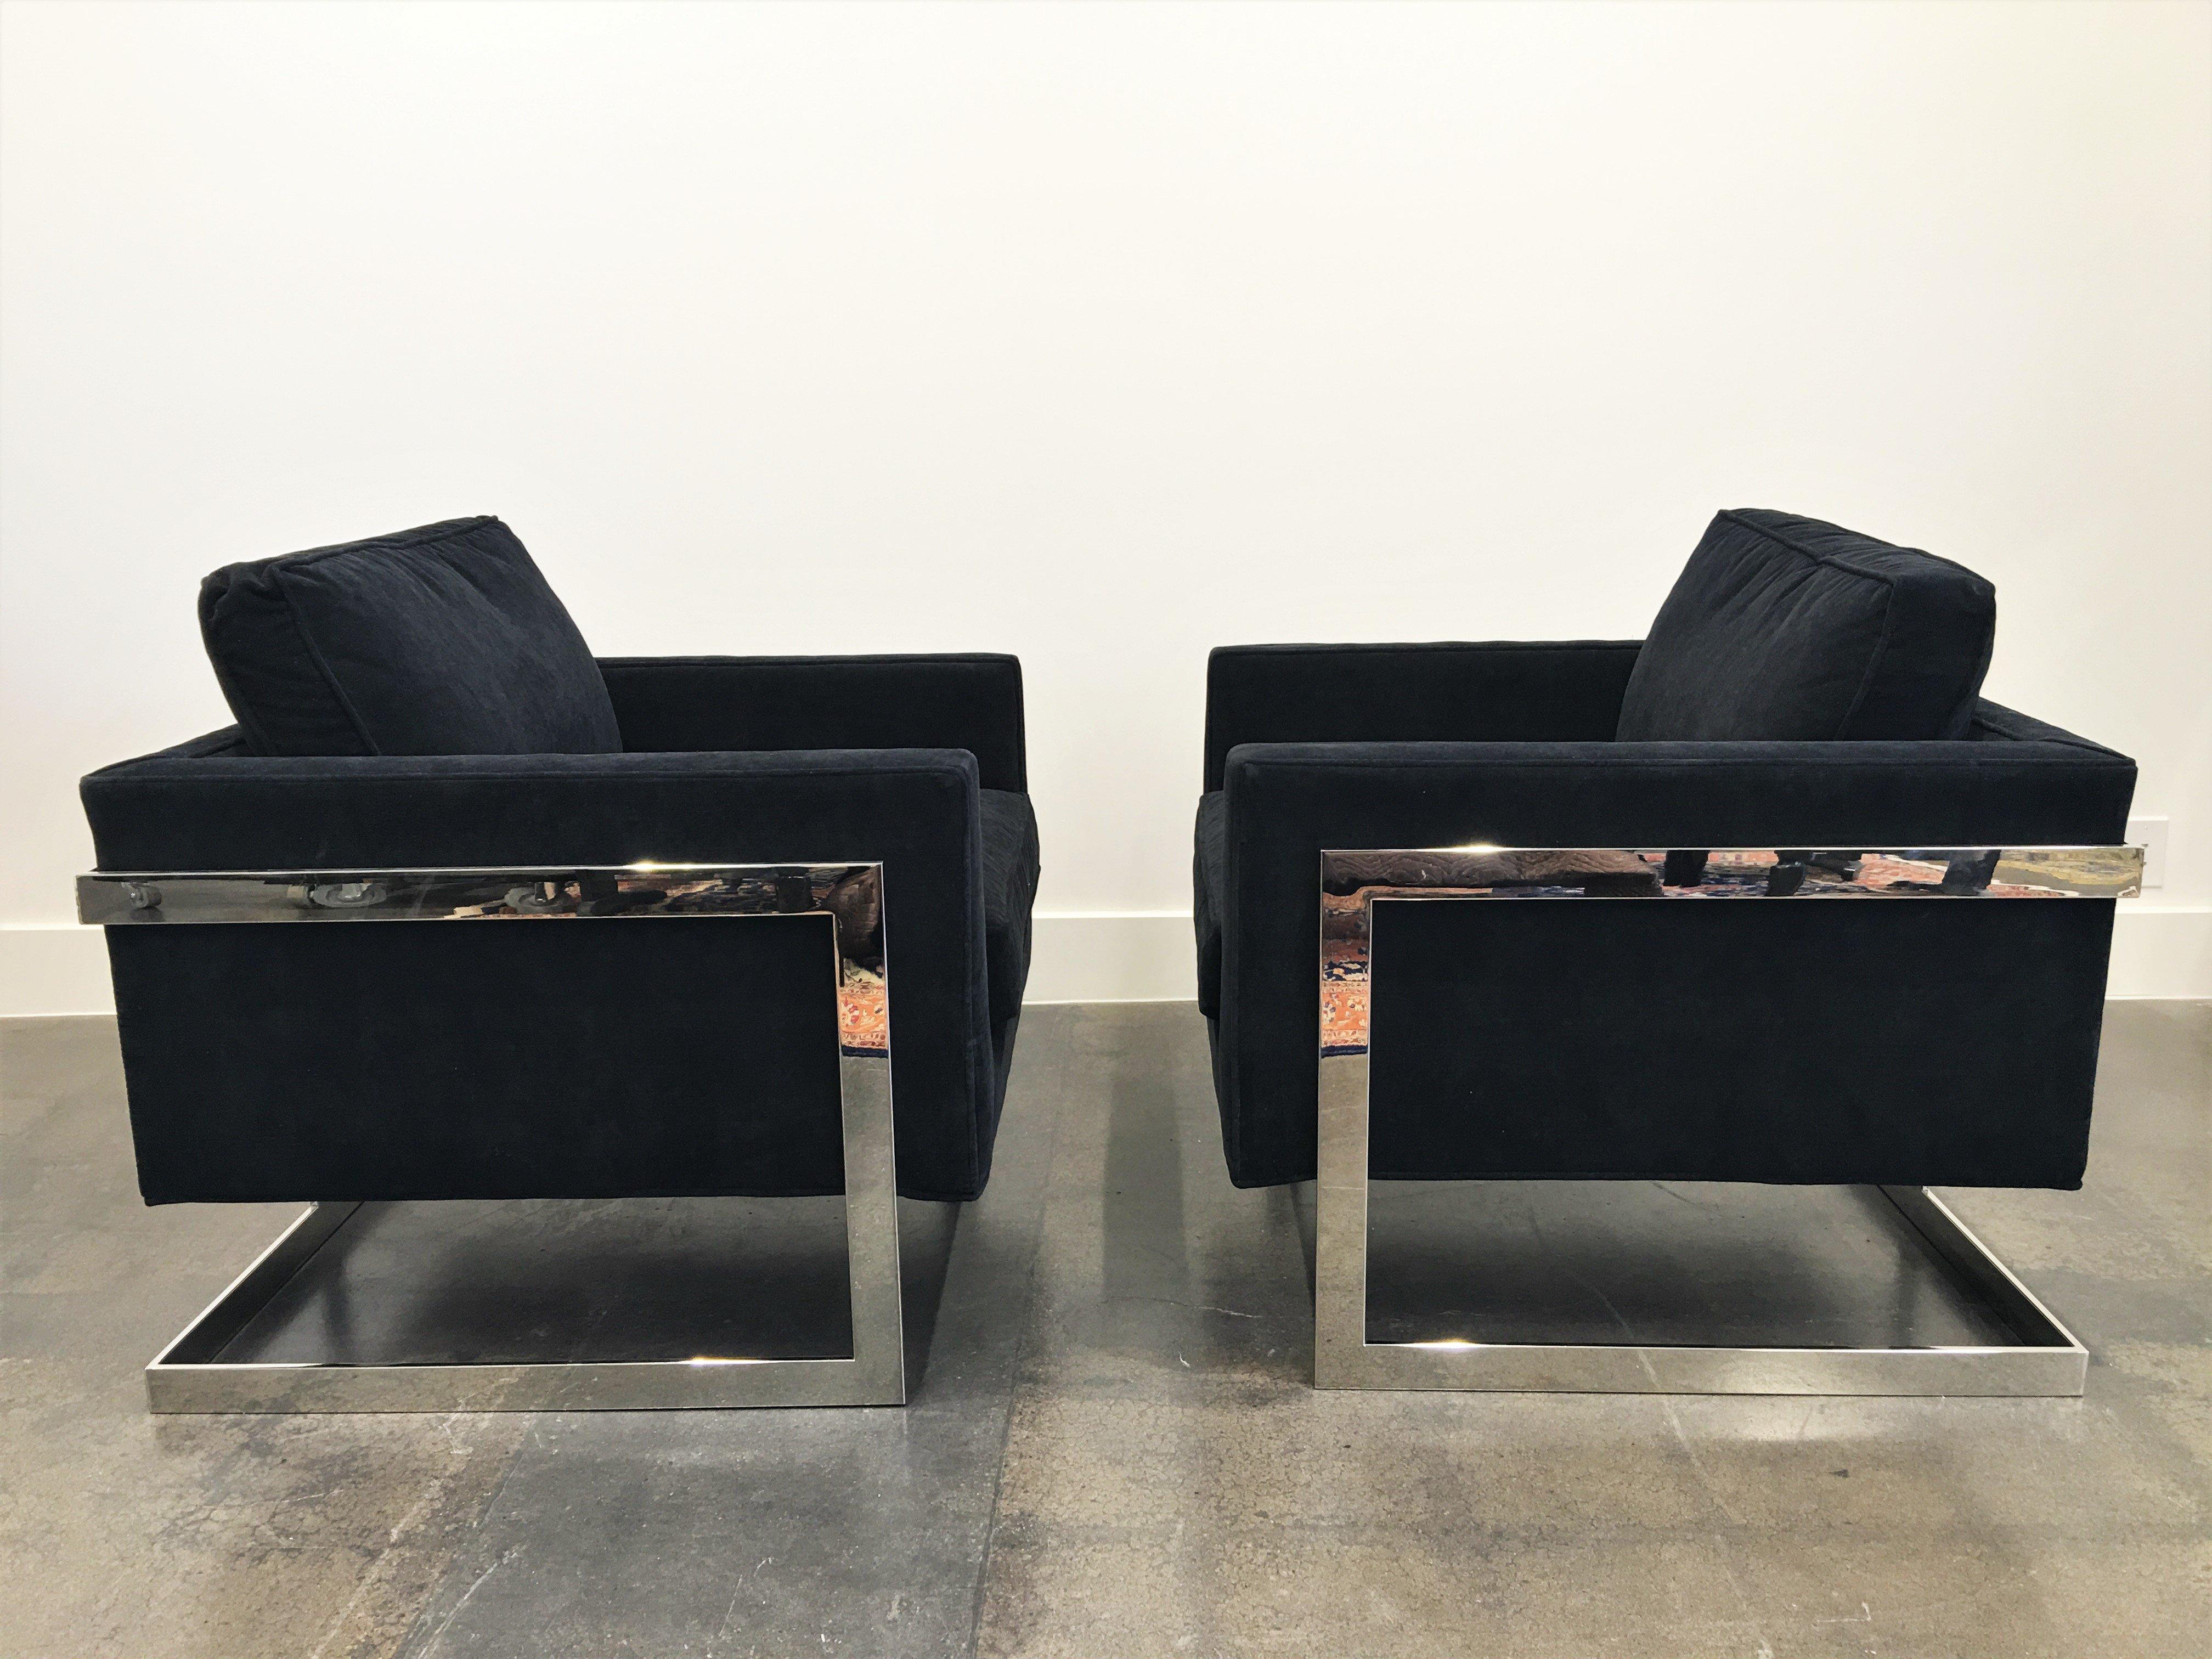 Pair of architectural club/lounge chairs by Milo Baughman for Thayer Coggin American, circa 1970. Rectilinear polished T-back steel frame supports an upholstered cube seat. These are the larger of the two that were made by Milo, hence wider and